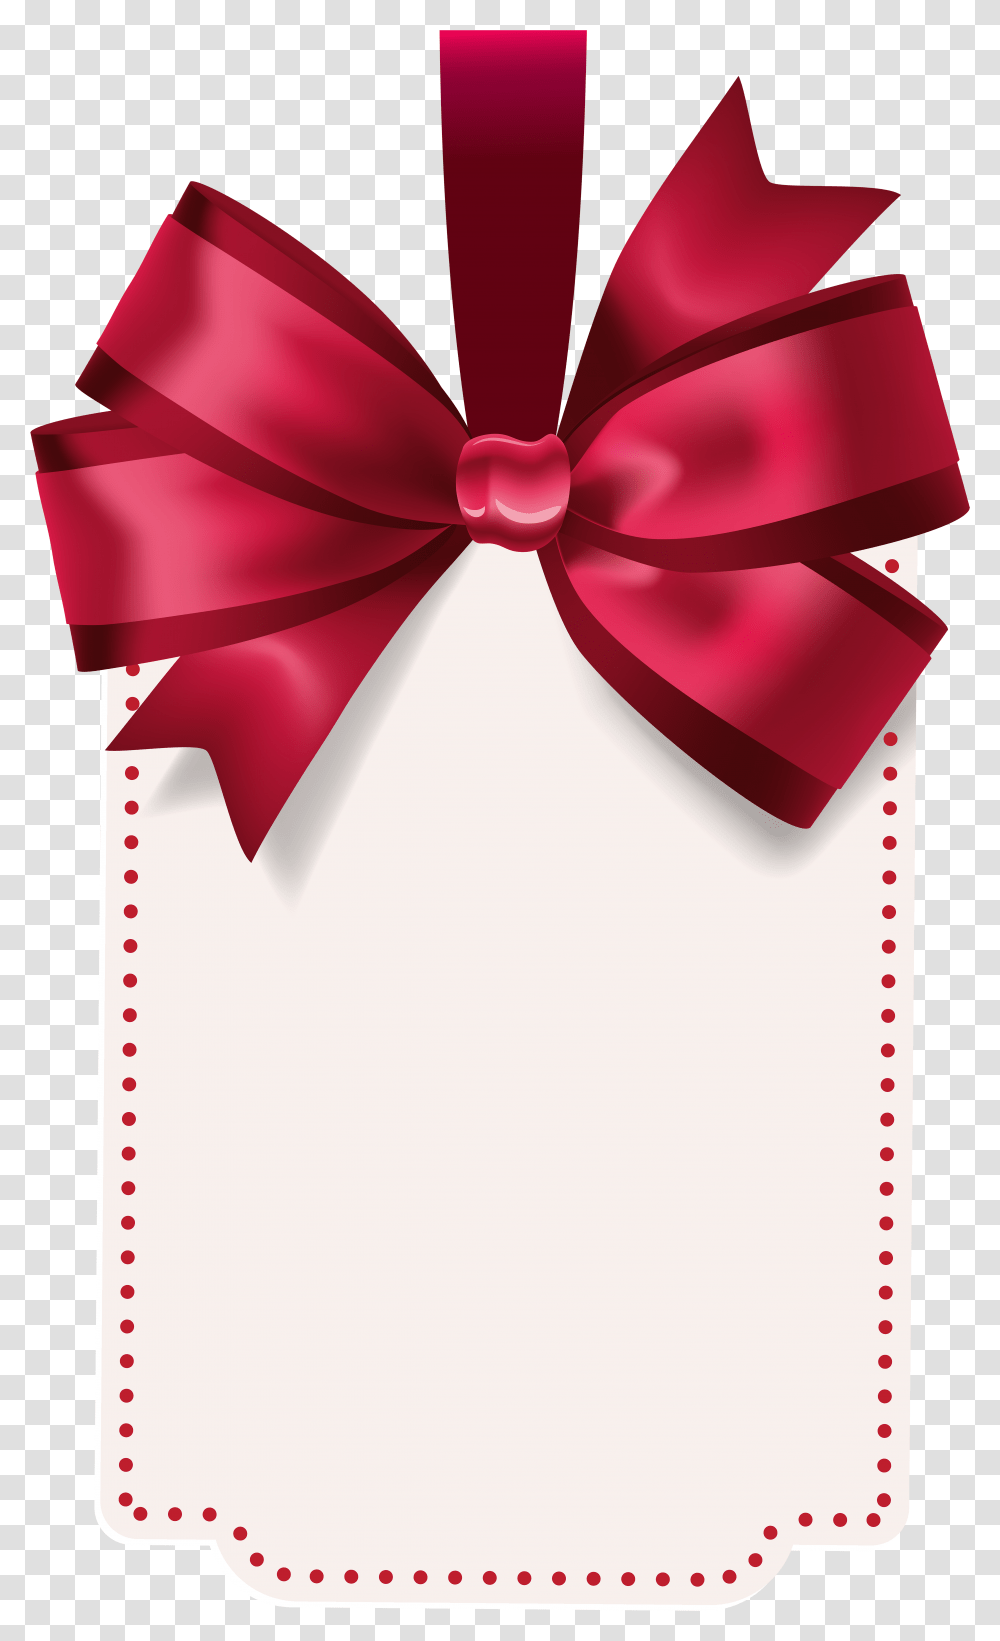 Label With Red Bow Template Clip Art Image Gallery Christmas Gift Tag, Lamp, Envelope Transparent Png